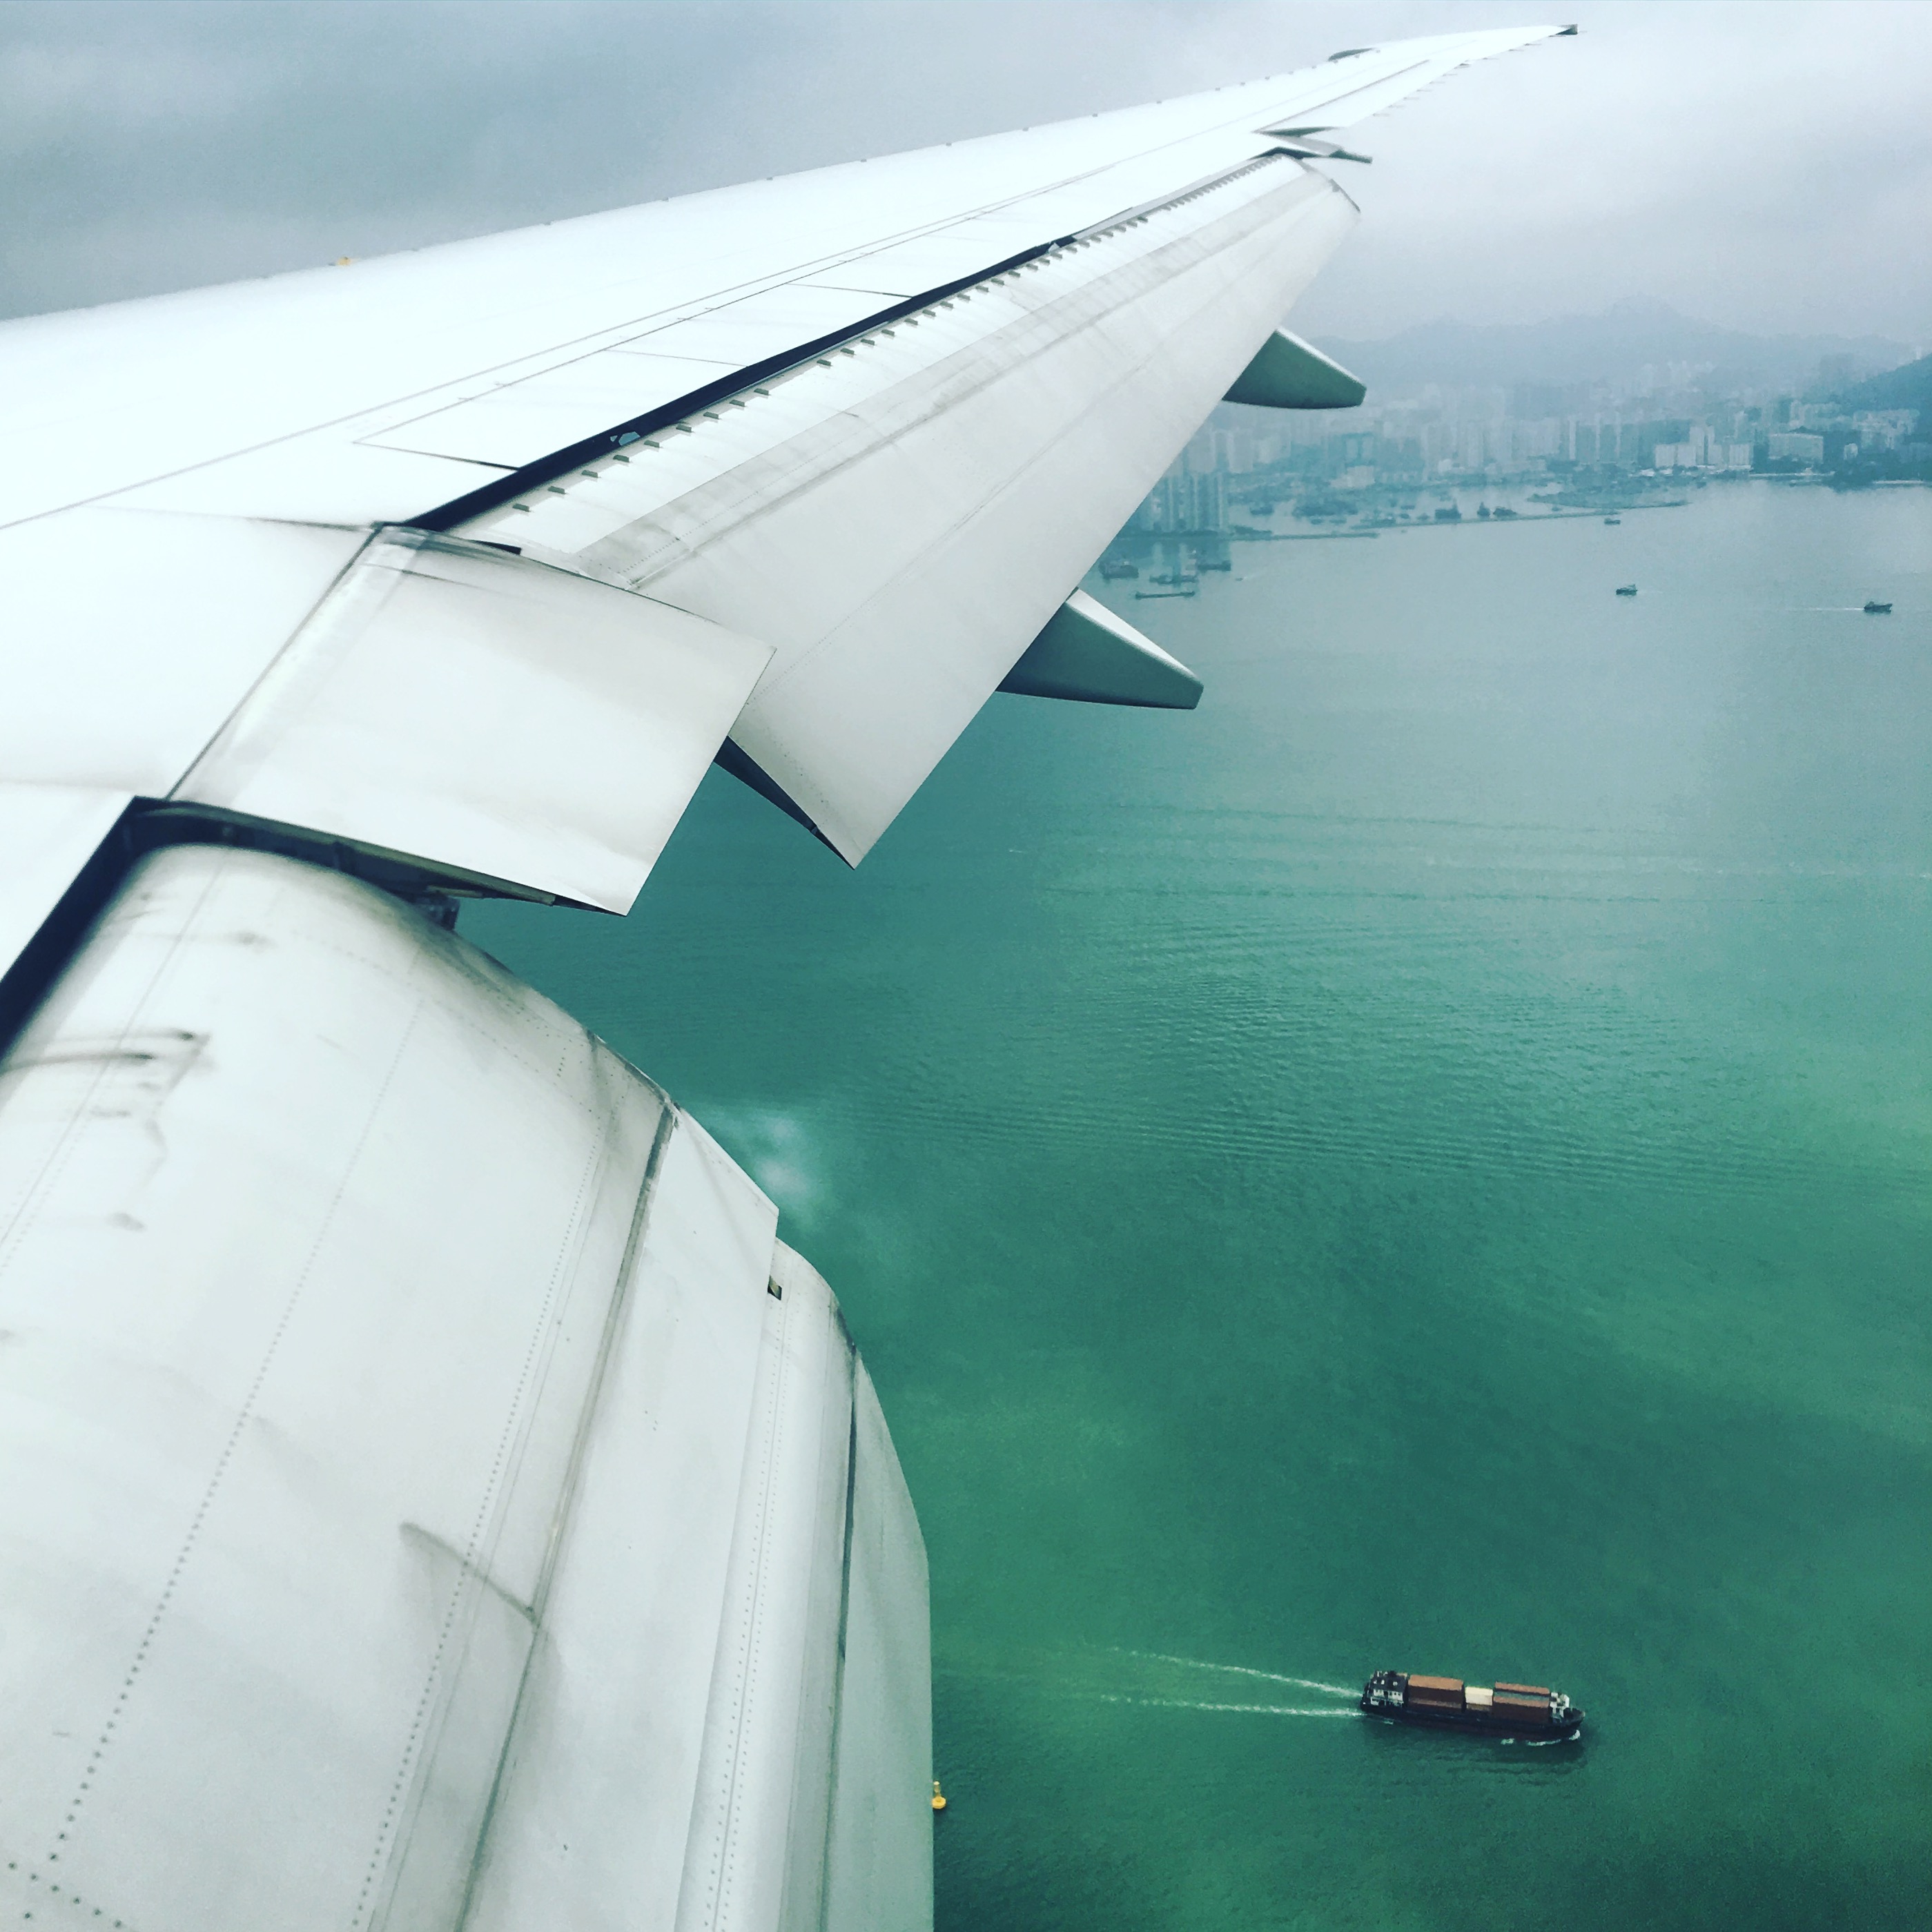 Container ships in the South China Sea visible from airplane about to land at Chek Lap Kok airport.